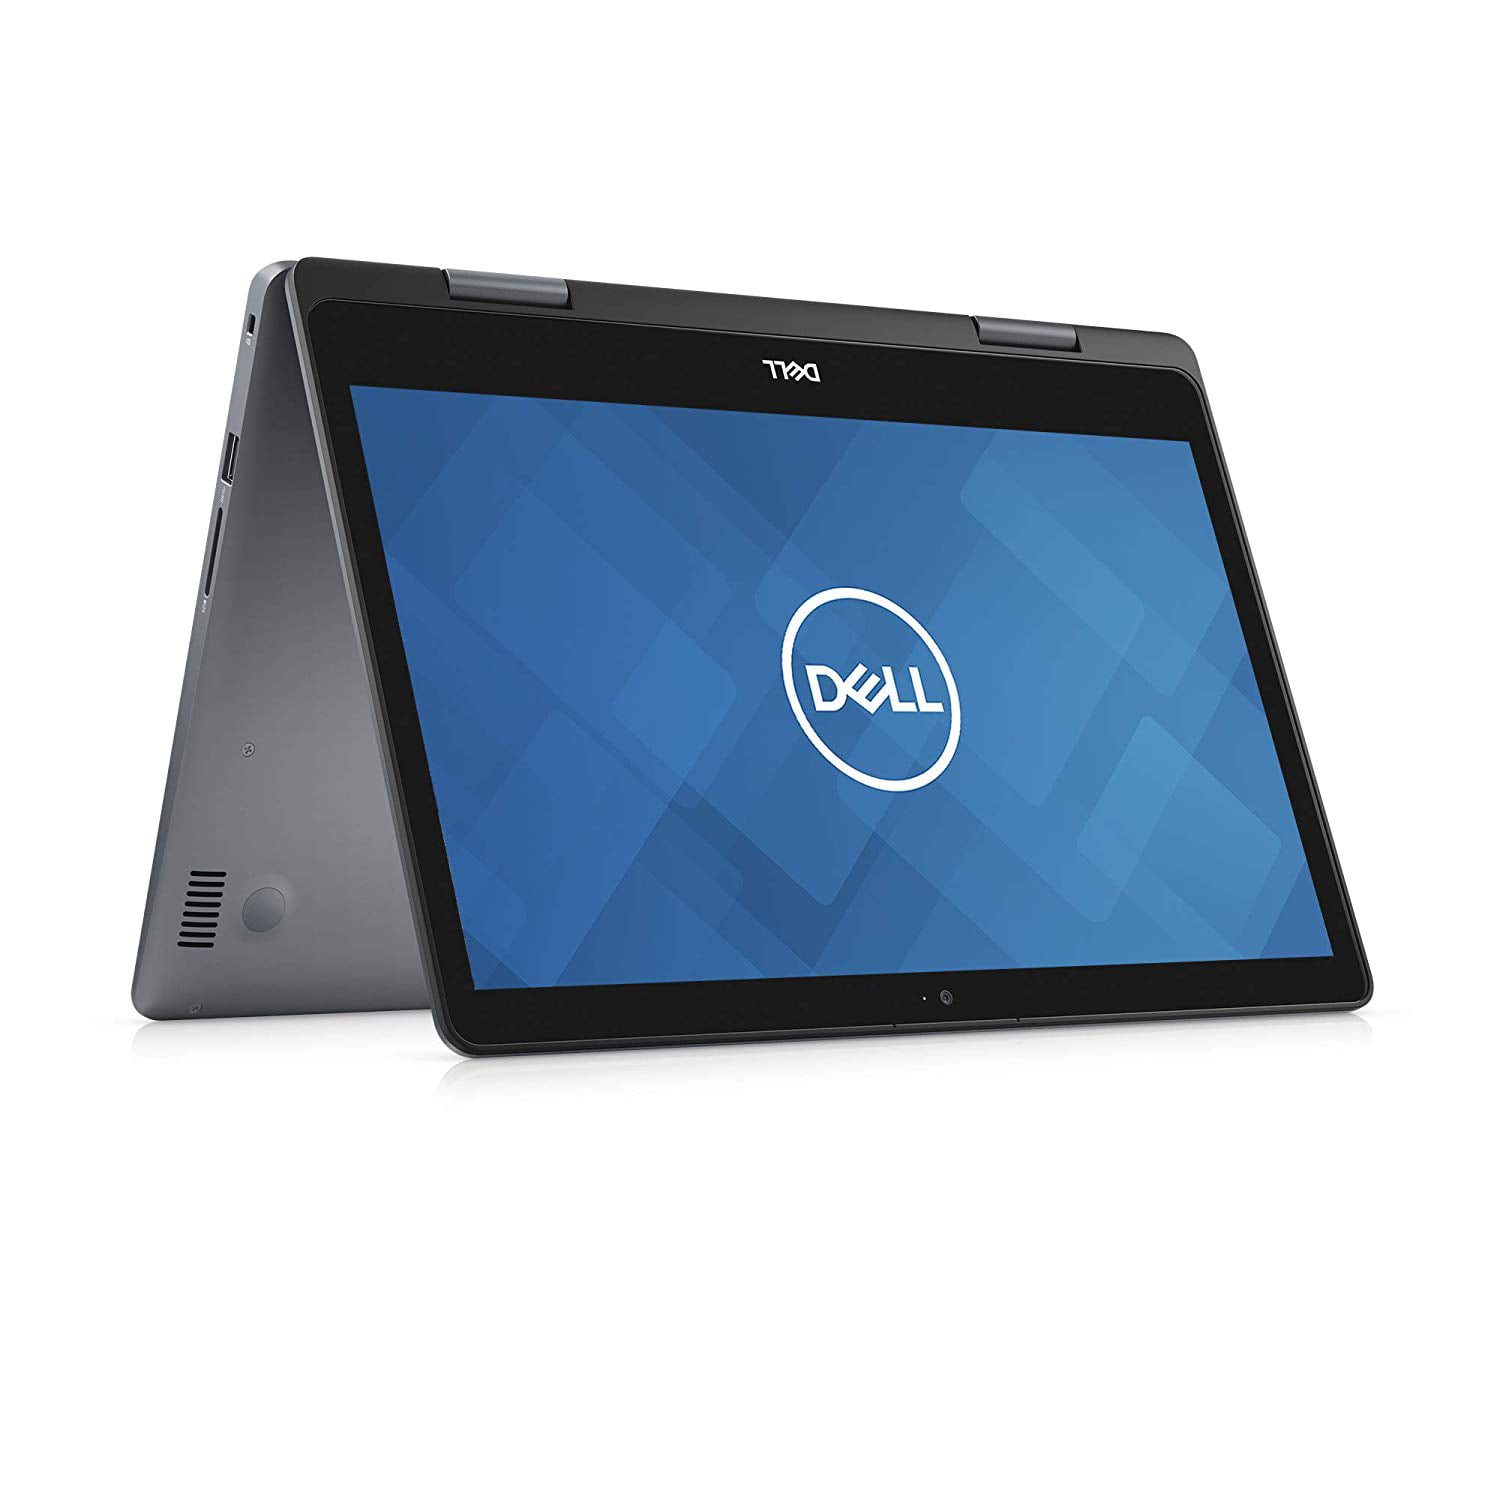 Dell Inspiron 14 Core i3 2-in-1 Touch Screen Laptop (2019